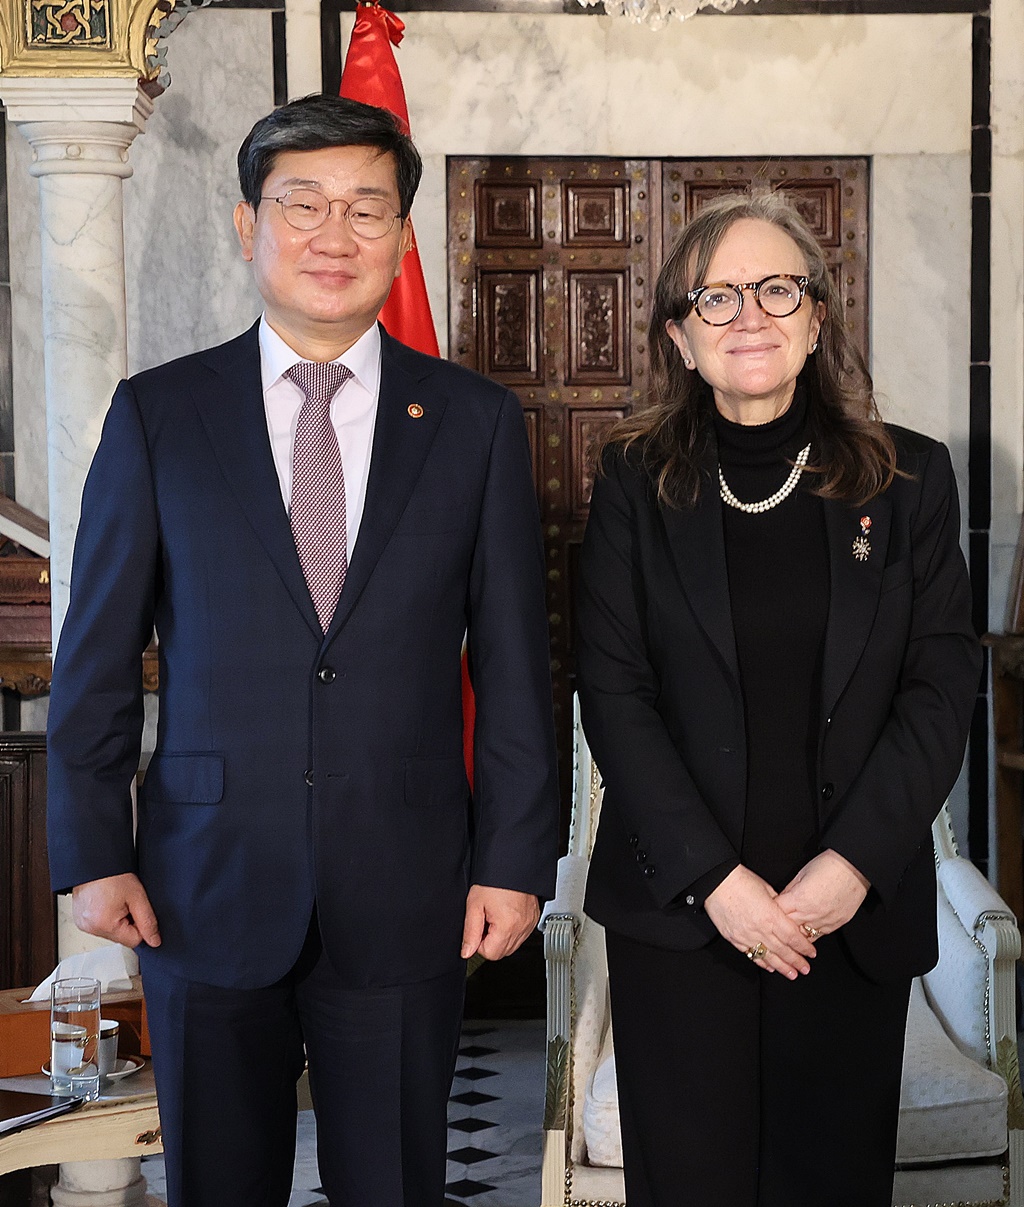 On the afternoon of the 28th (local time), Minister of the Interior and Safety Jeon Hae-cheol (left) takes a commemorative photo with Tunisian Prime Minister Najla Bouden Romdhan at the Prime Minister's Office in Tunis, the Tunisian capital  after discussing the ways to develop the Korea-Tunisia Digital Government Cooperation Center and to jointly enter the digital government market in the Middle East and North Africa region.